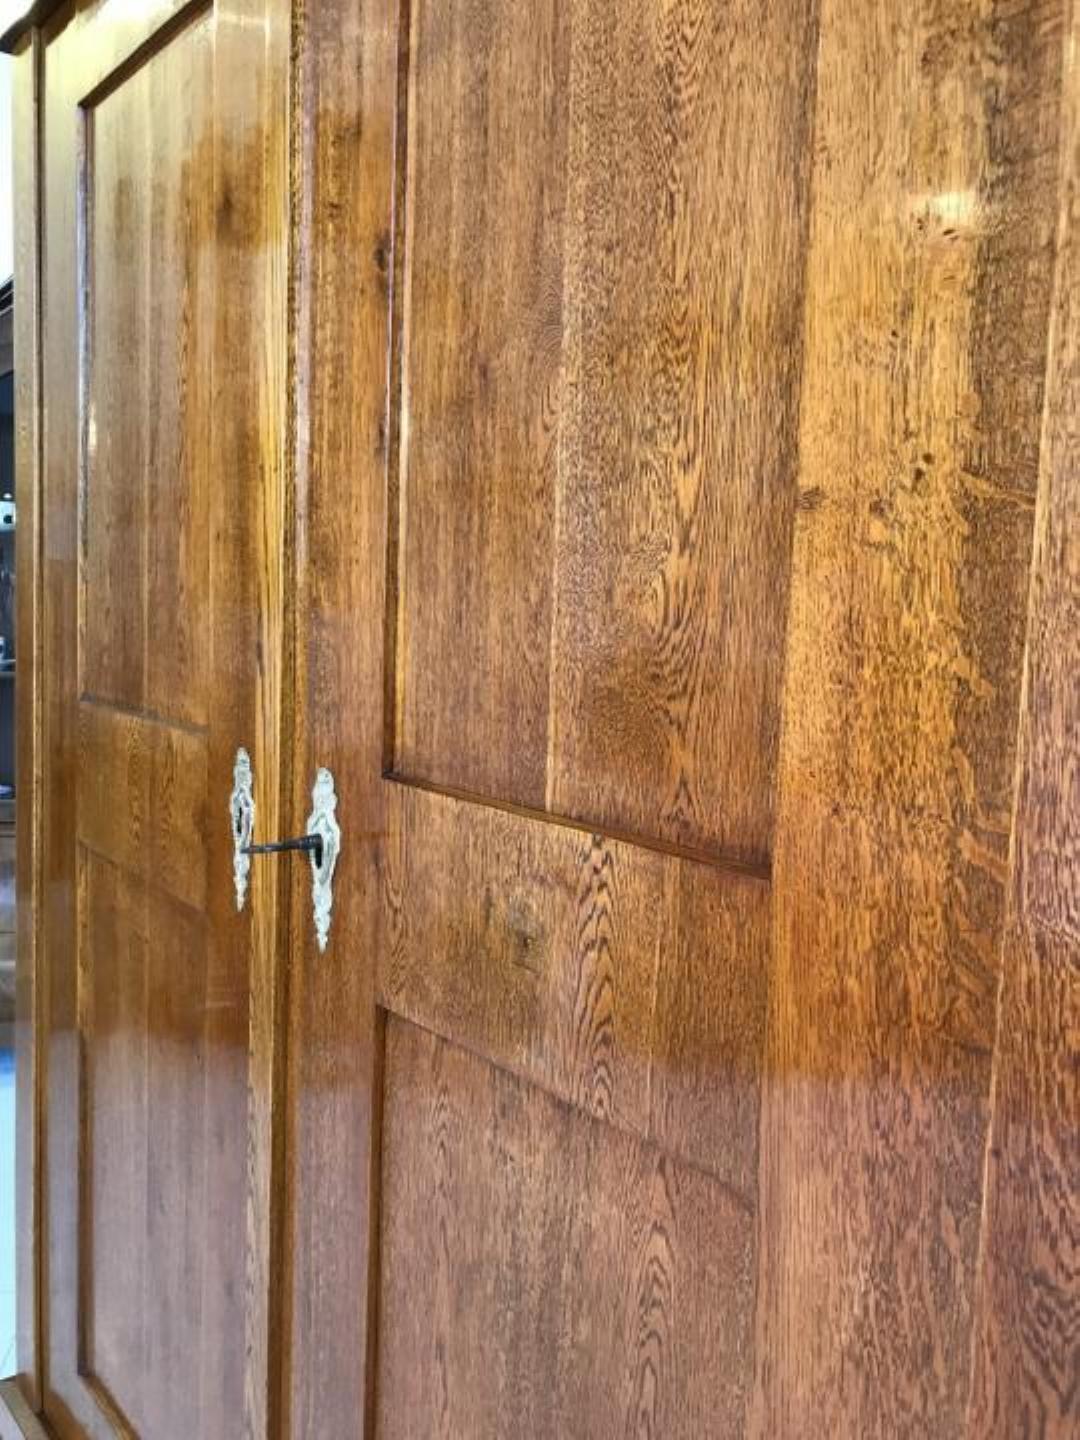 Antique early Biedermeier two-door wardrobe or armoire with a classic design.
Made circa 1810 in Germany out of carefully selected oakwood with a beautiful grain.
This cabinet has been recently restored and polished with shellac, therefore its in